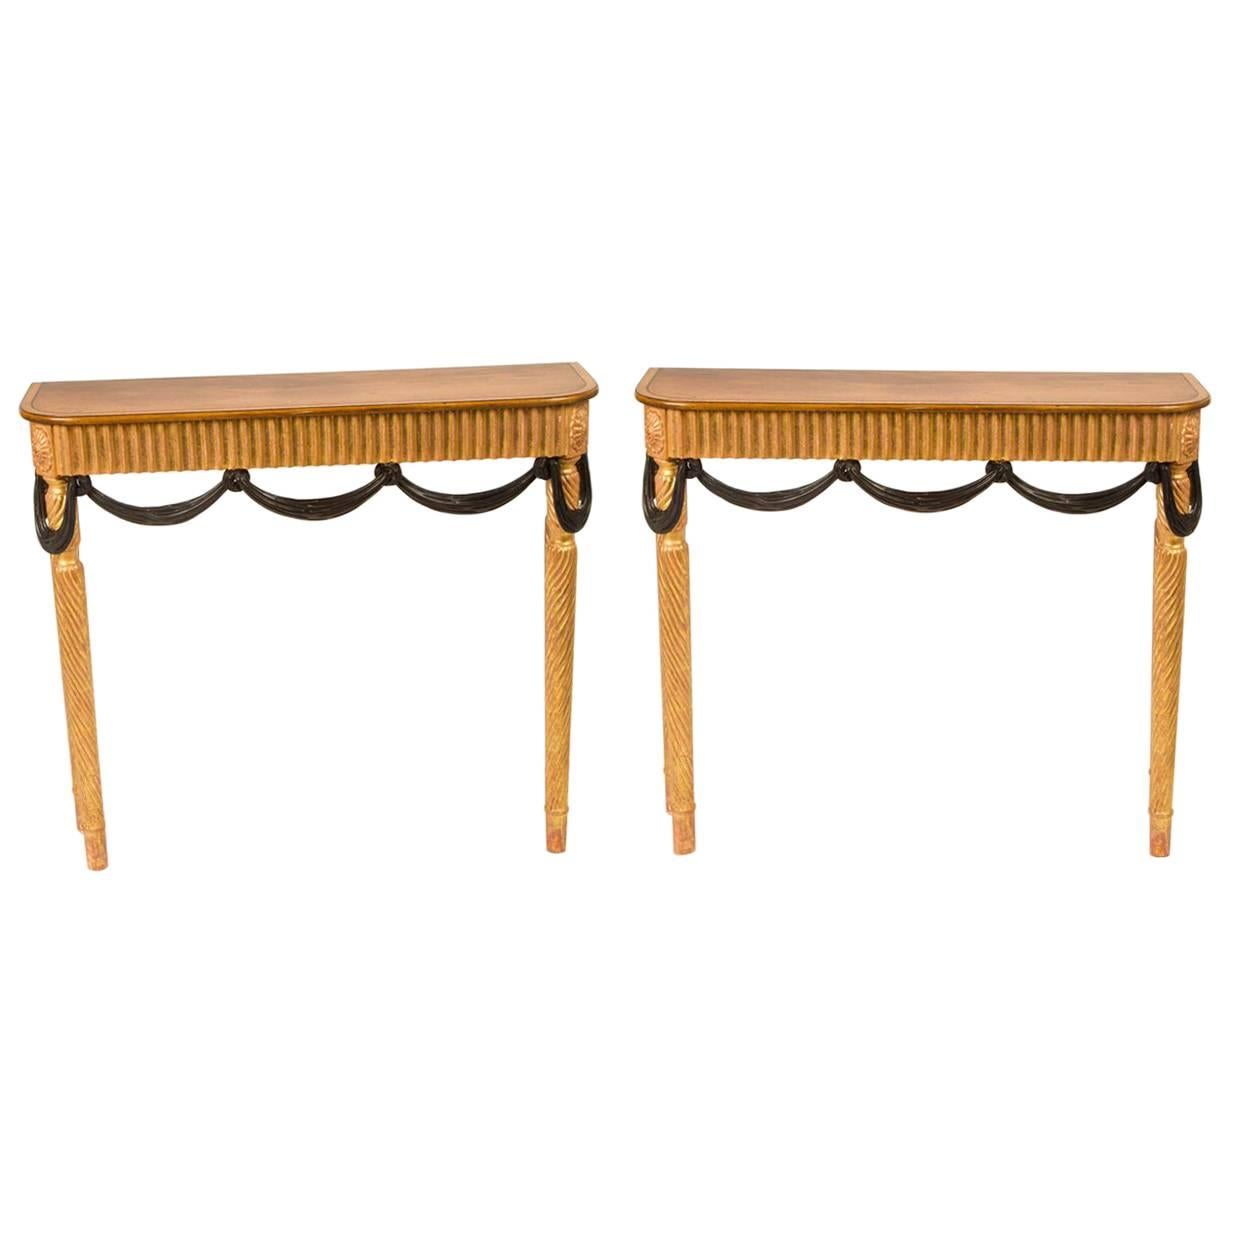 Pair of Italian Neoclassical Style Giltwood and Ebonized Consoles